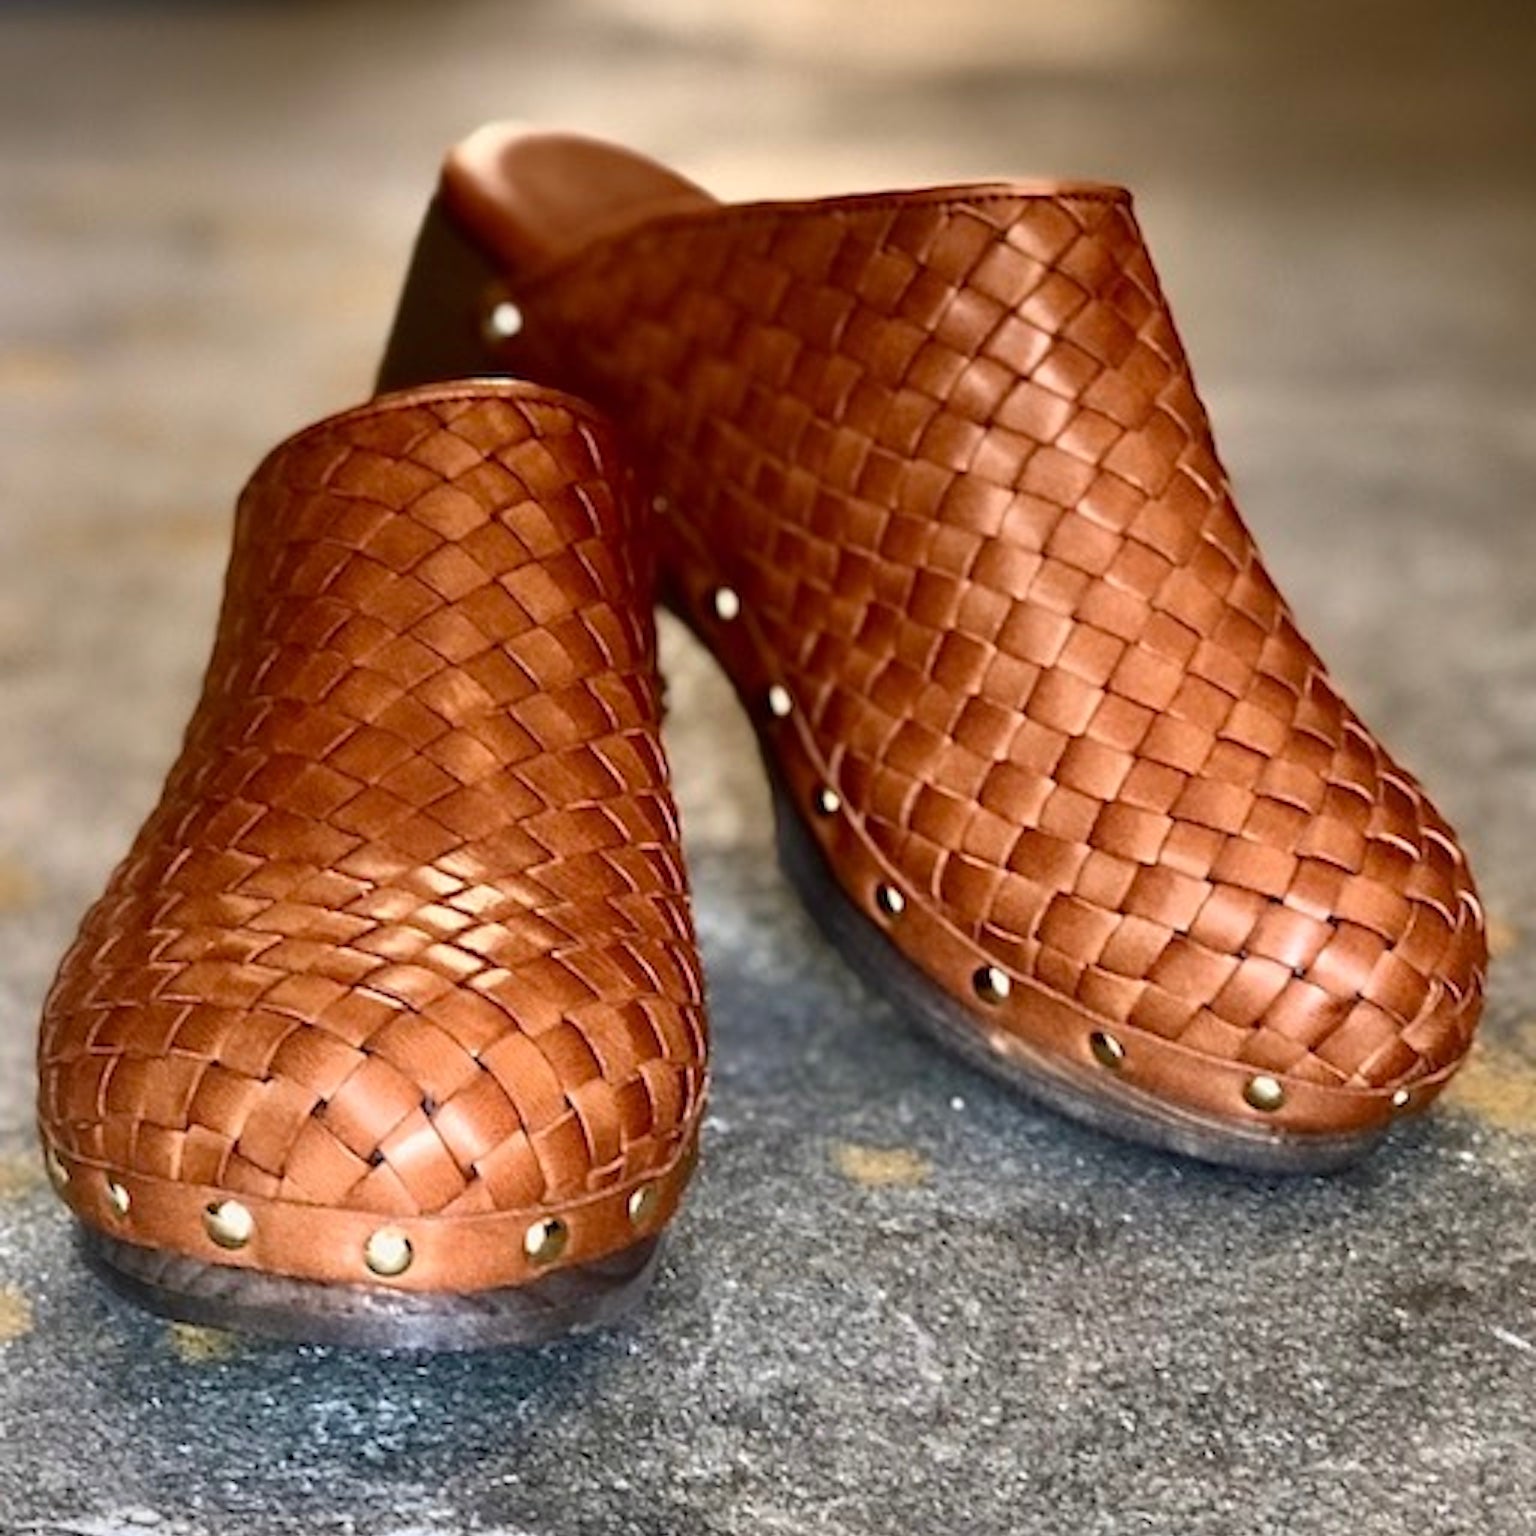 LABEL17 presents the Clogs Tresse in Cognac, with VIBRAM Sole, hand-braided lamb Nappaleather